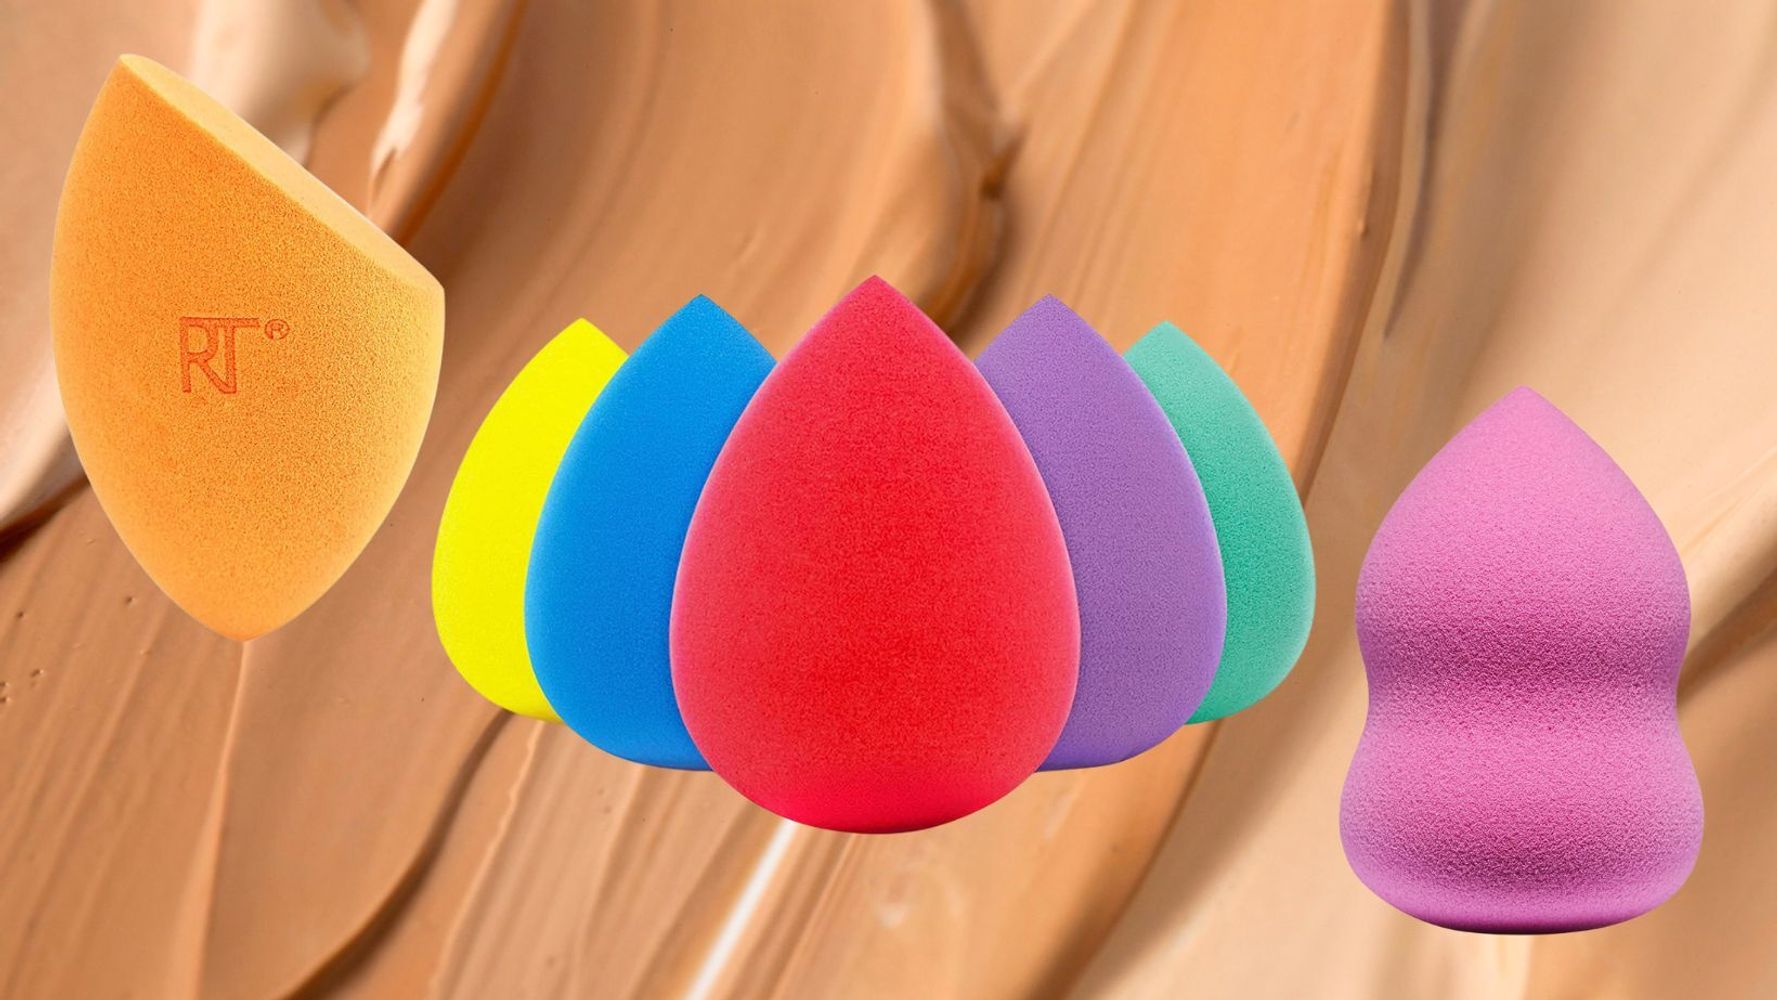 How to Clean a Beauty Blender: 4 Fast and Easy Methods